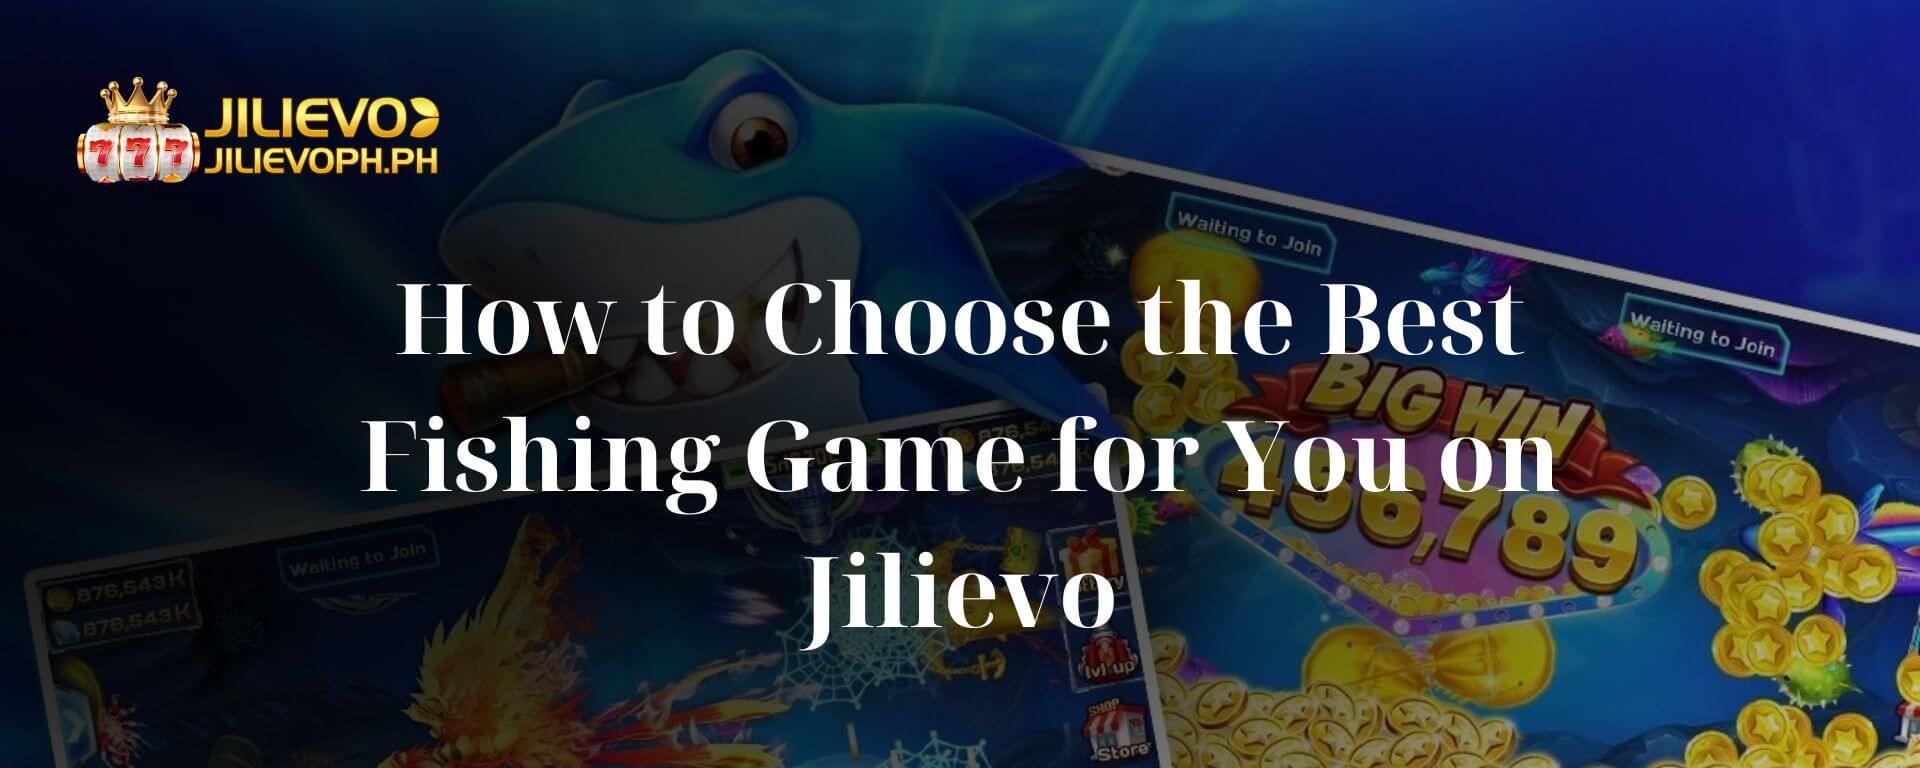 How to Choose the Best Fishing Game for You on Jilievo